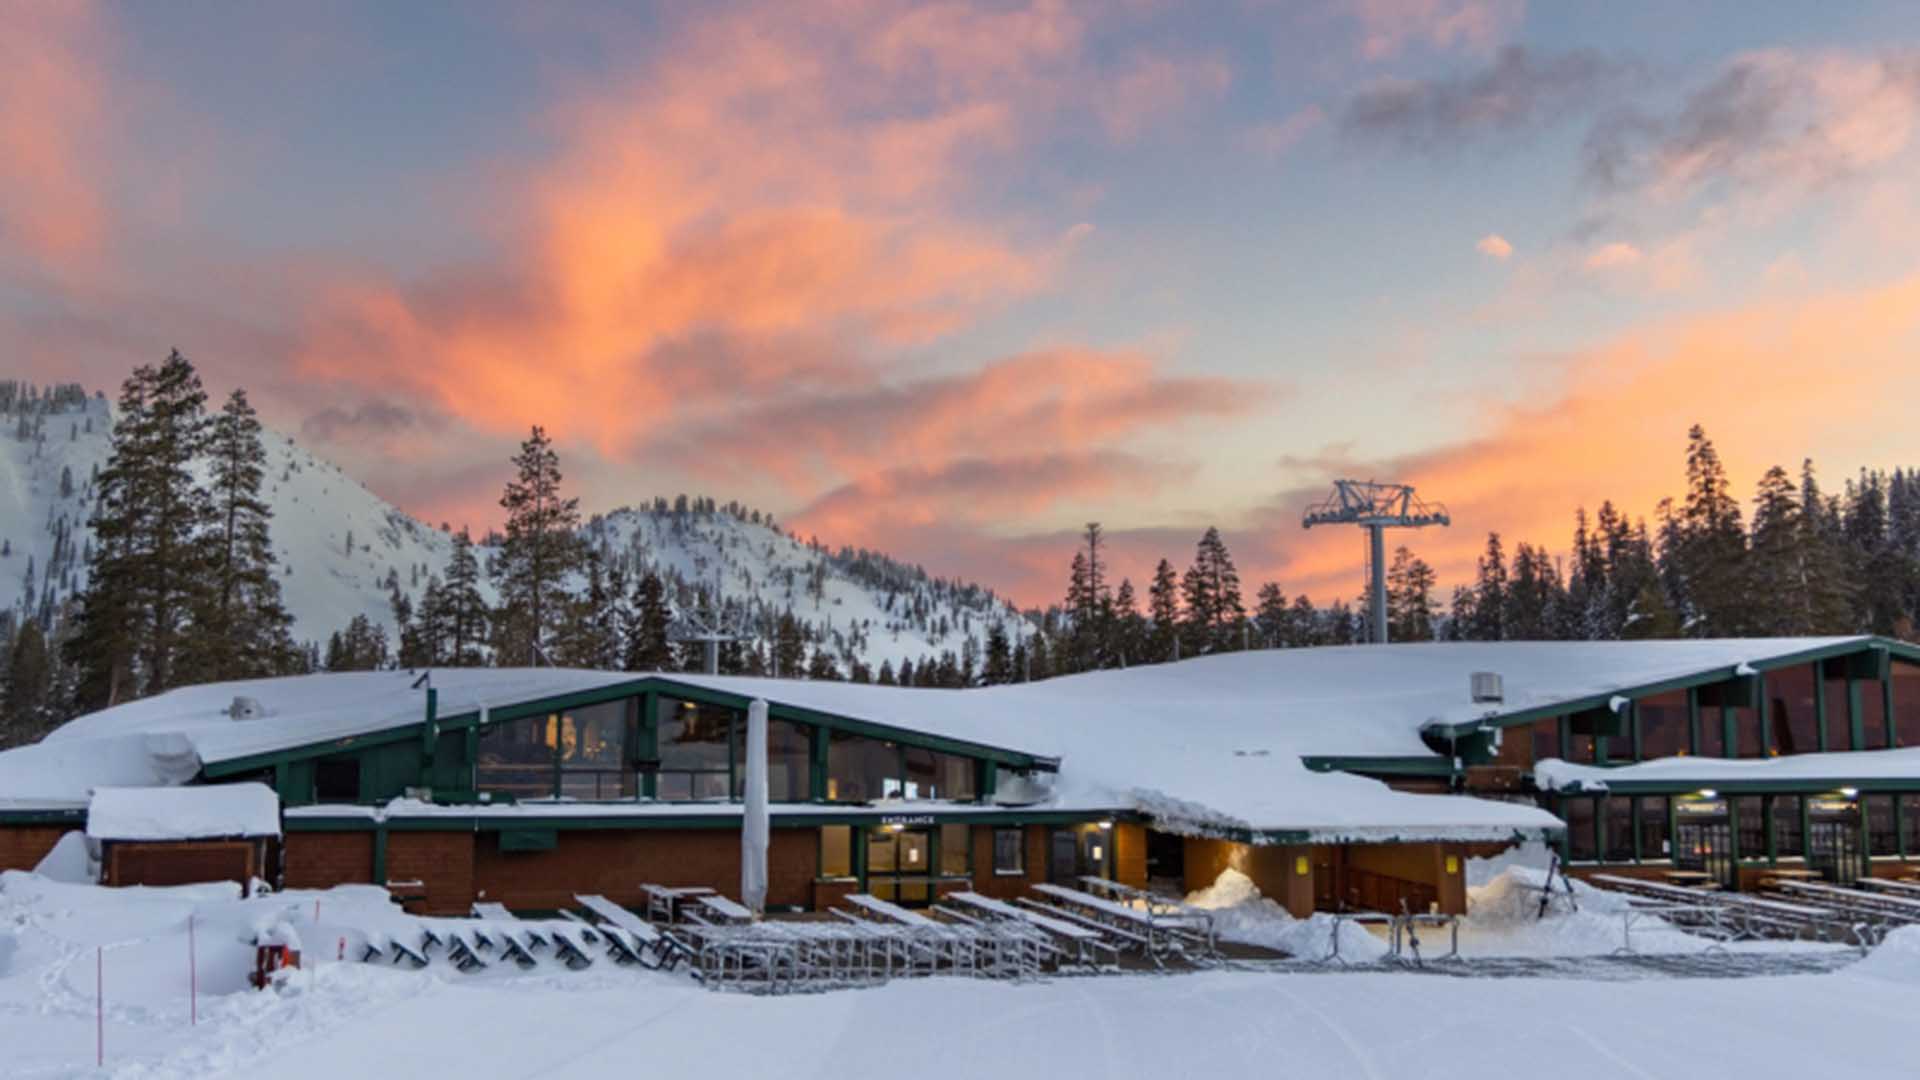 A gorgeous sunset above the Chalet at Alpine in Lake Tahoe.